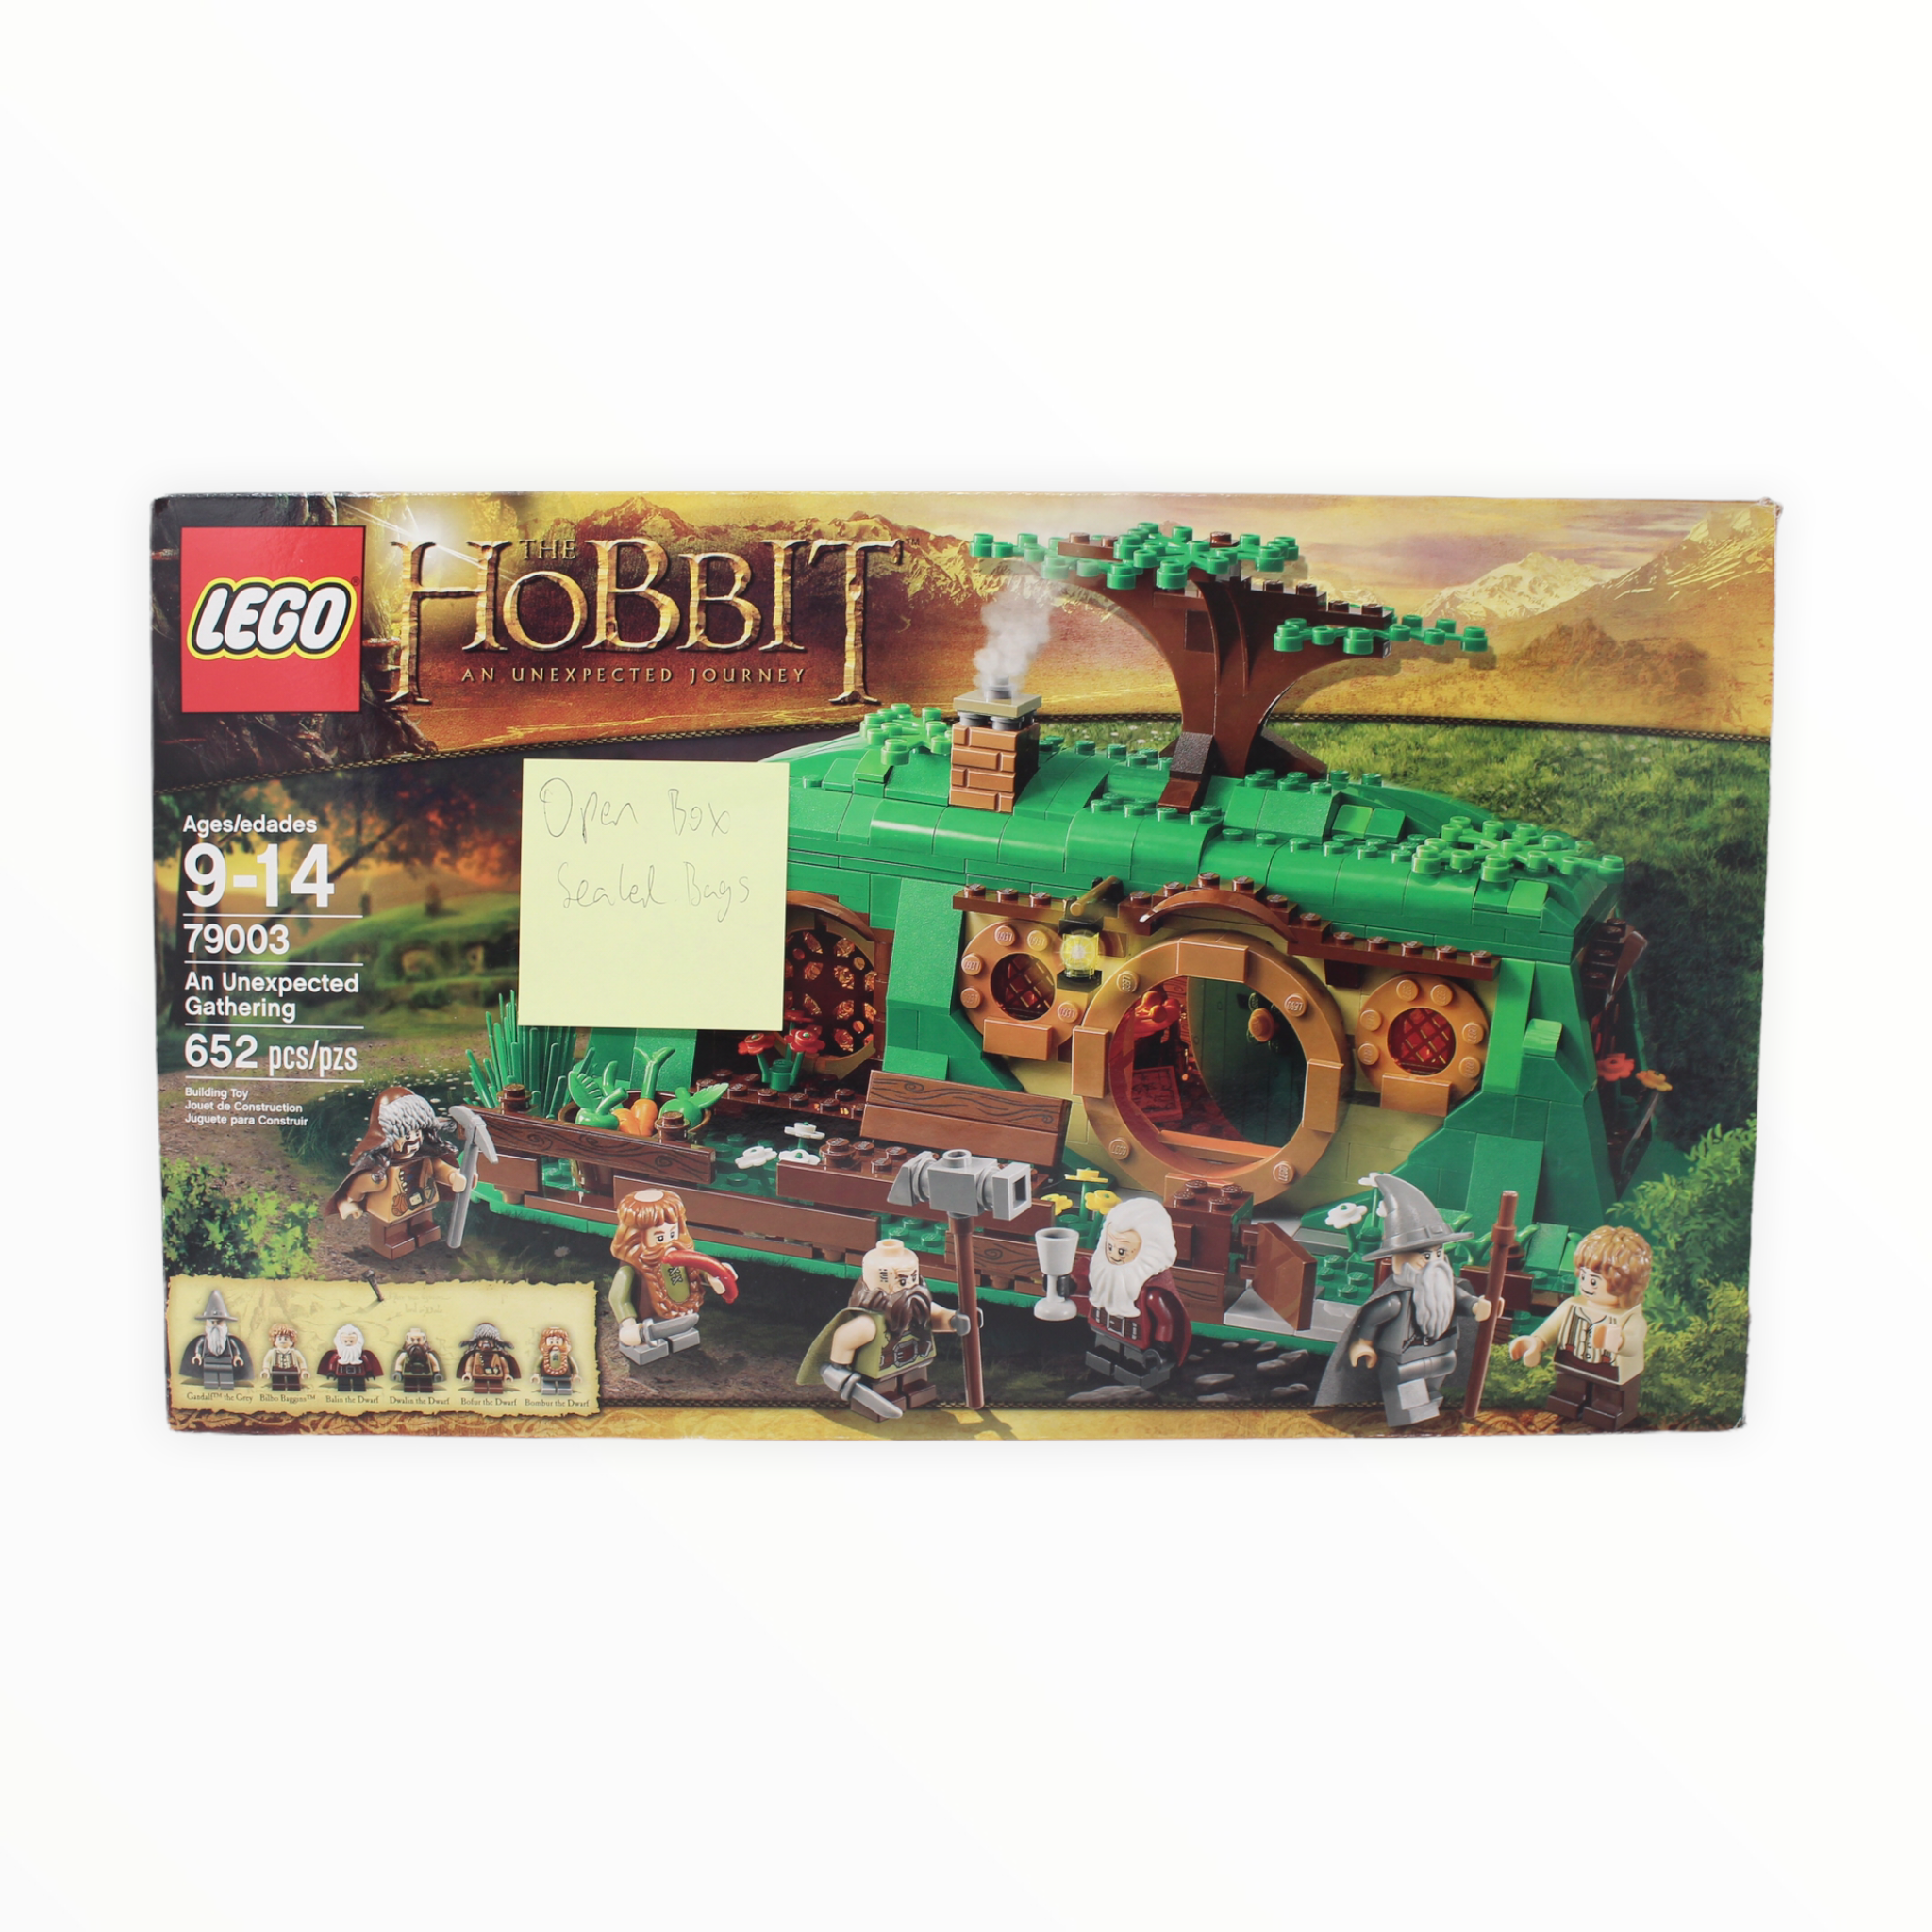 Certified Used Set 79003 The Hobbit An Unexpected Gathering